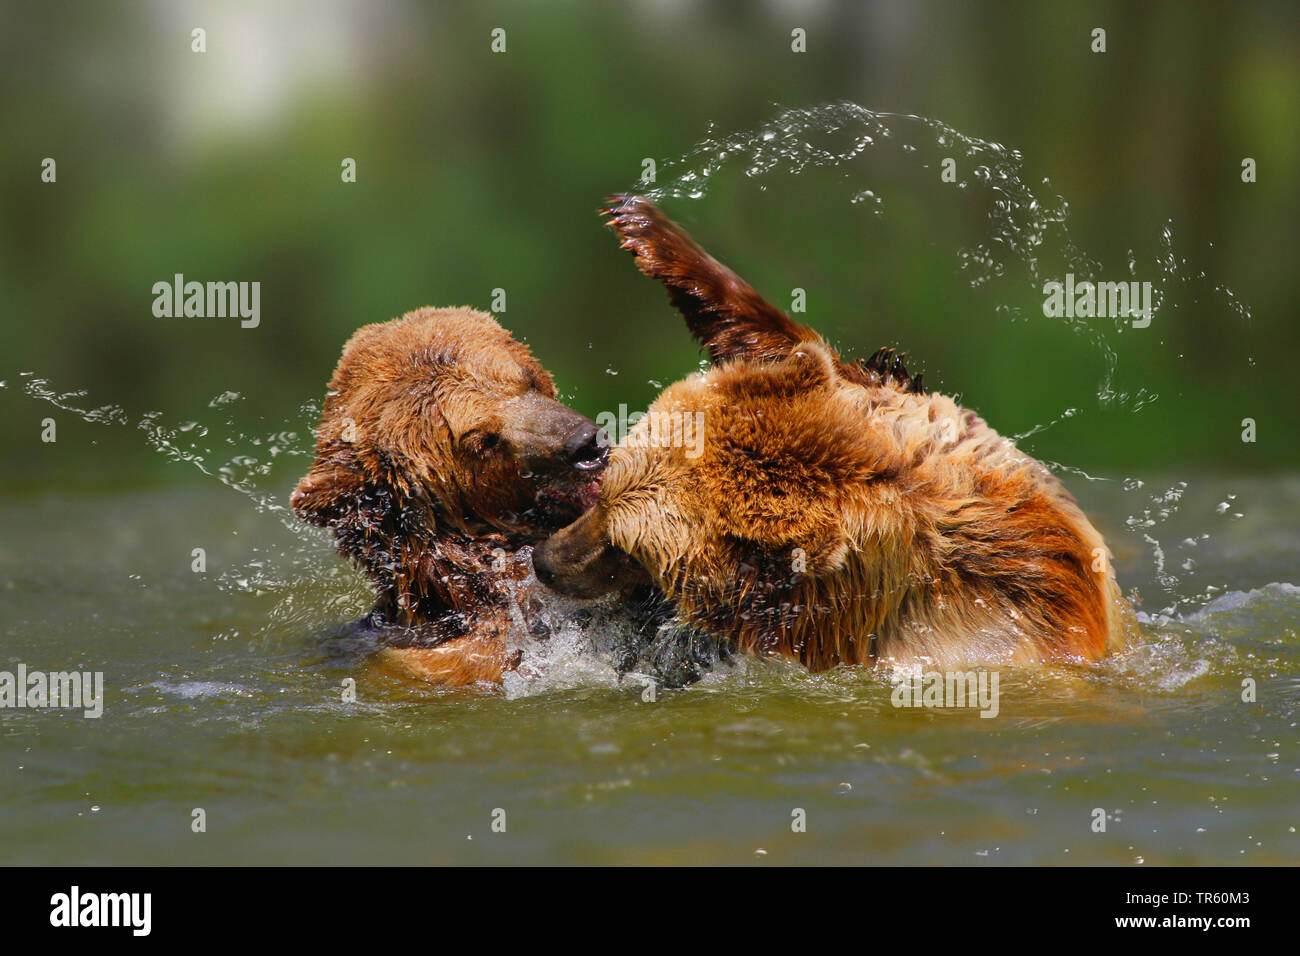 European brown bear (Ursus arctos arctos), two bear cubs scuffling in the water, Germany Stock Photo